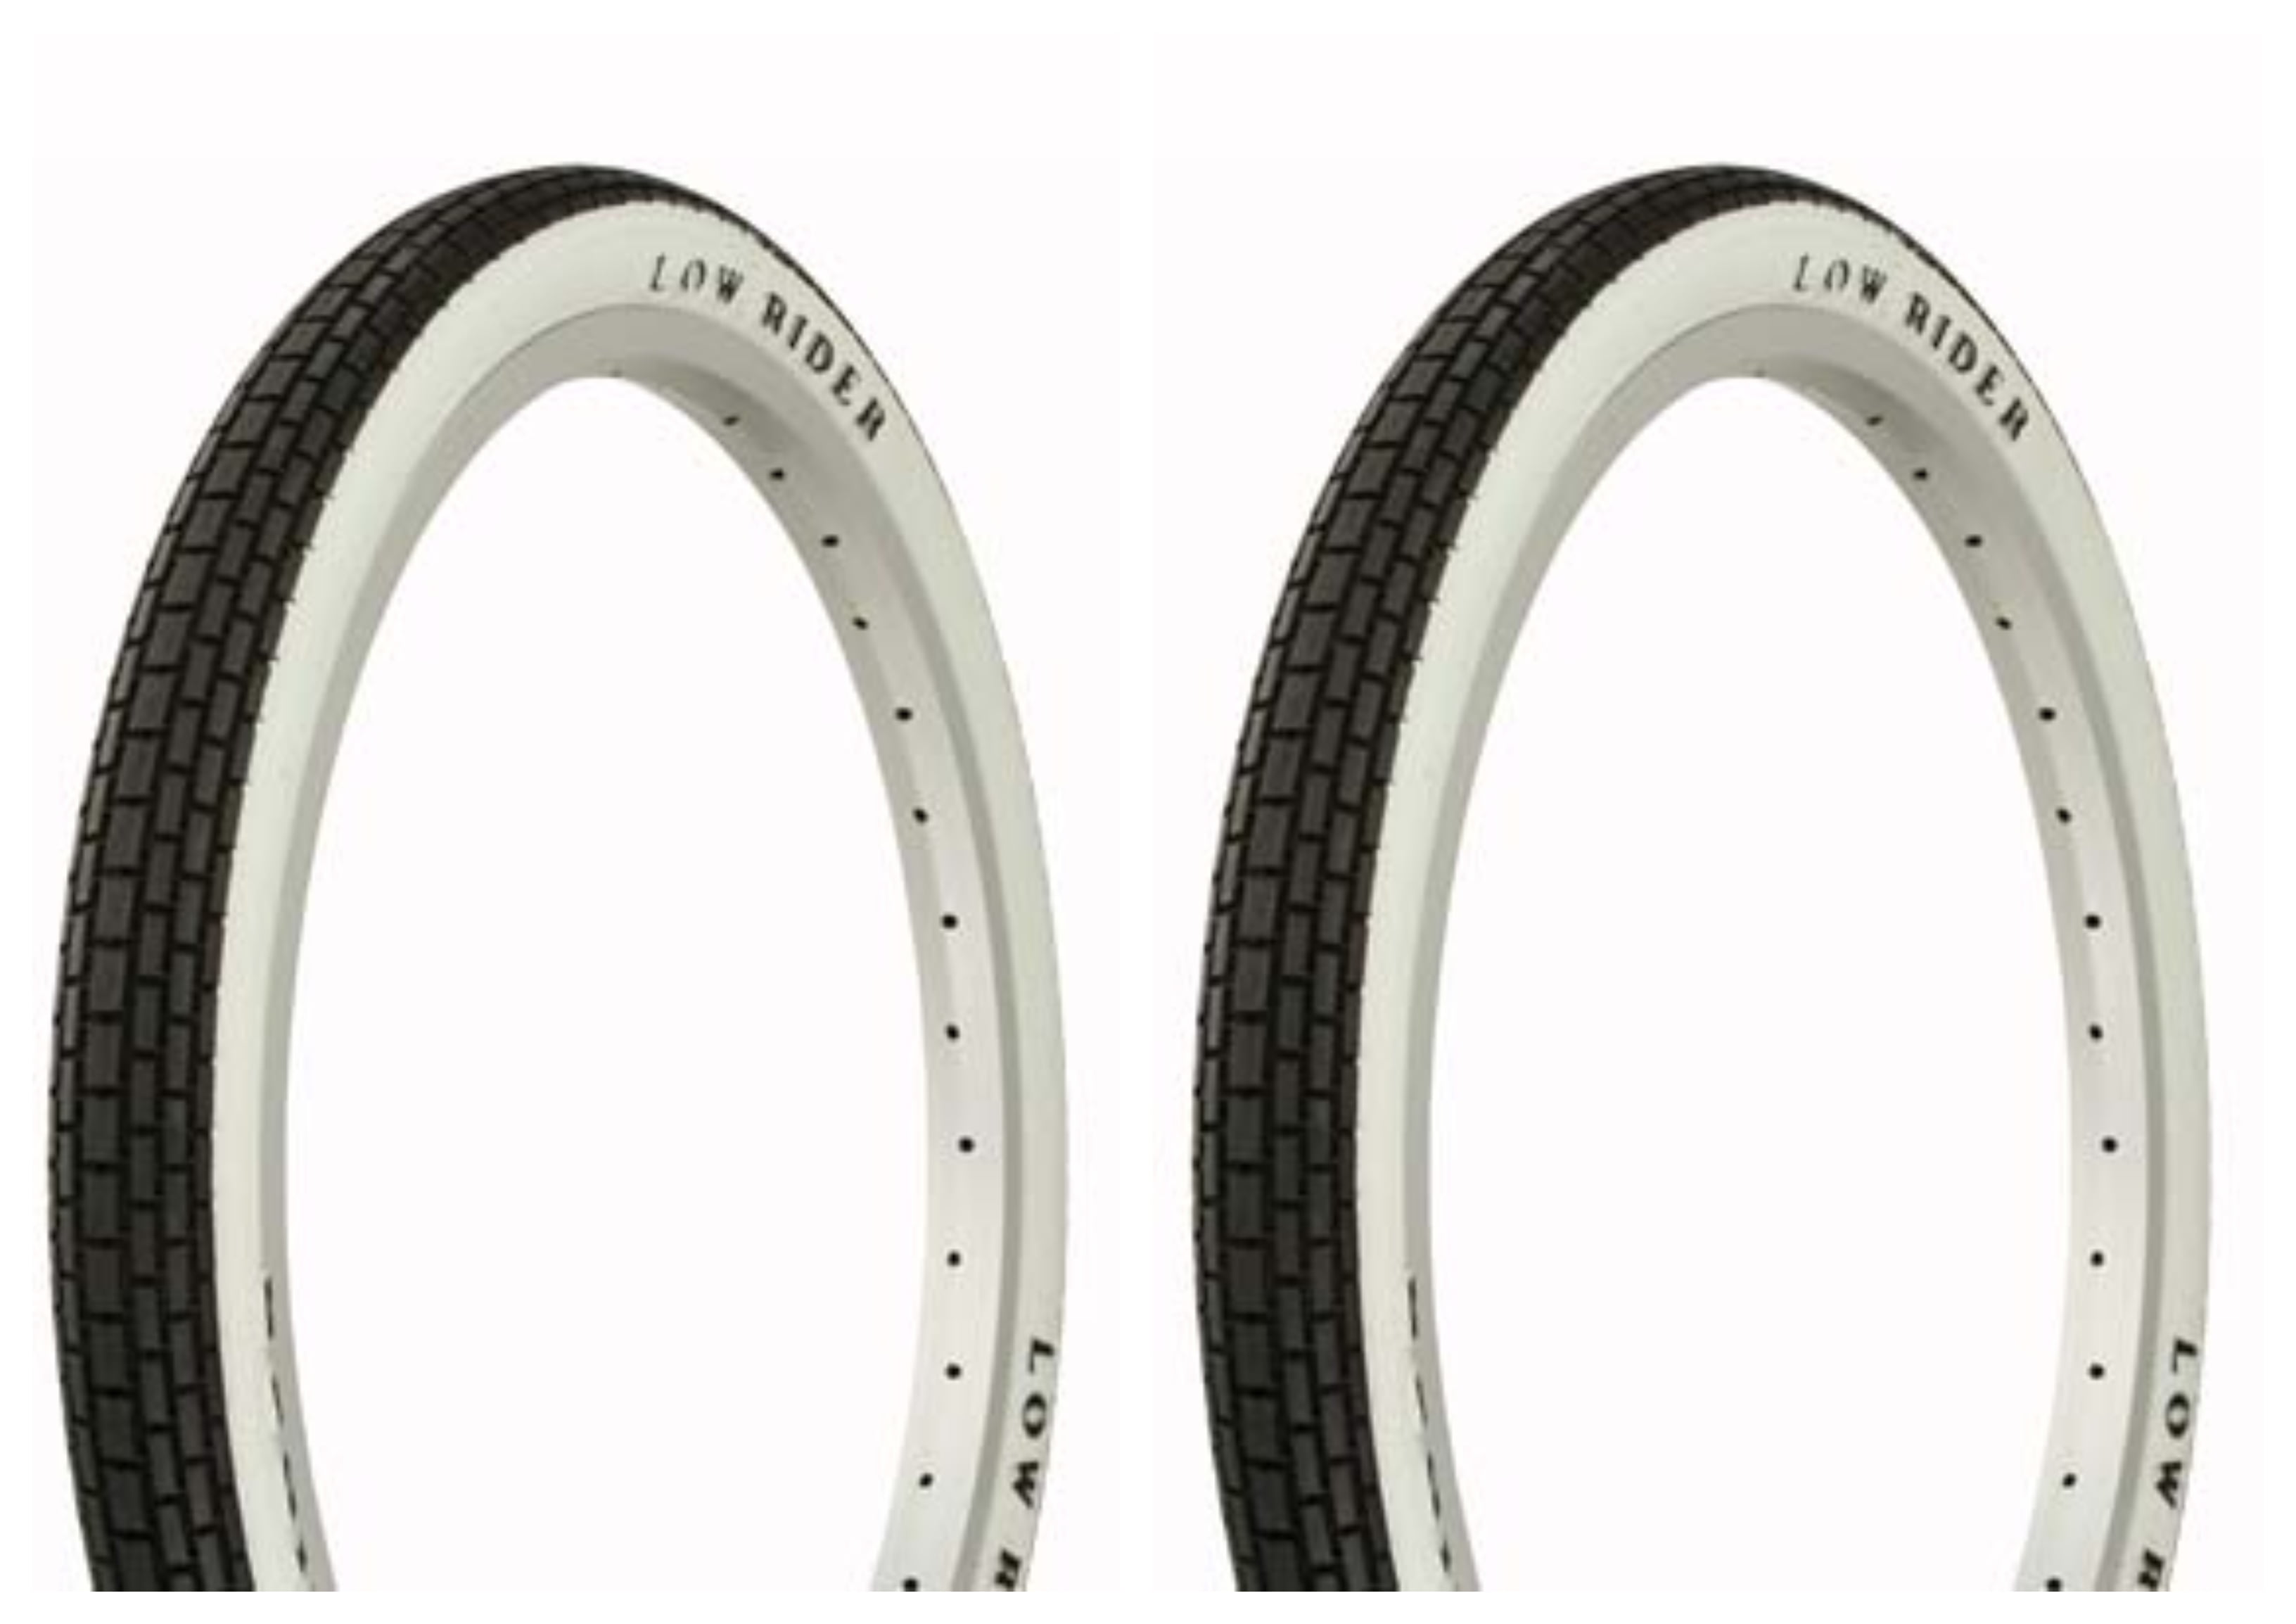 ORIGINAL DURO TIRE IN 26 X 1.75 BLACK/WHITE SIDE WALL HF120A. NEW 